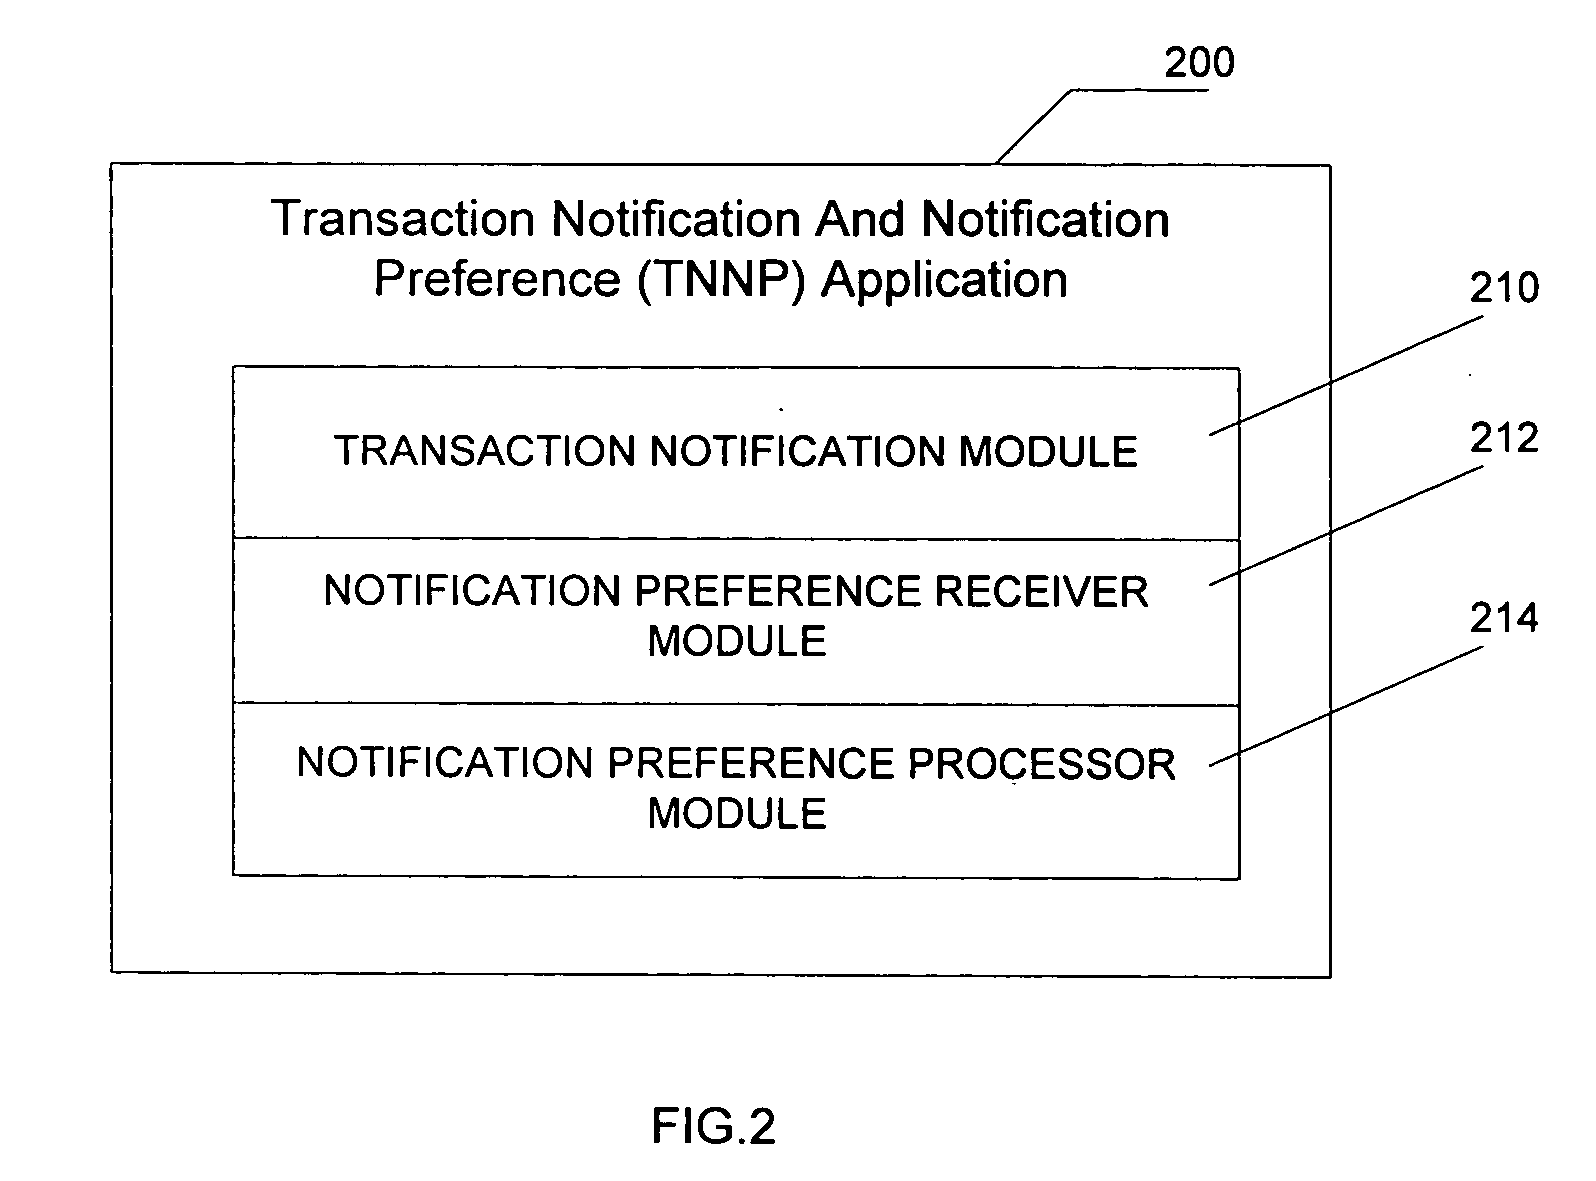 Method and system for defining financial transaction notification preferences